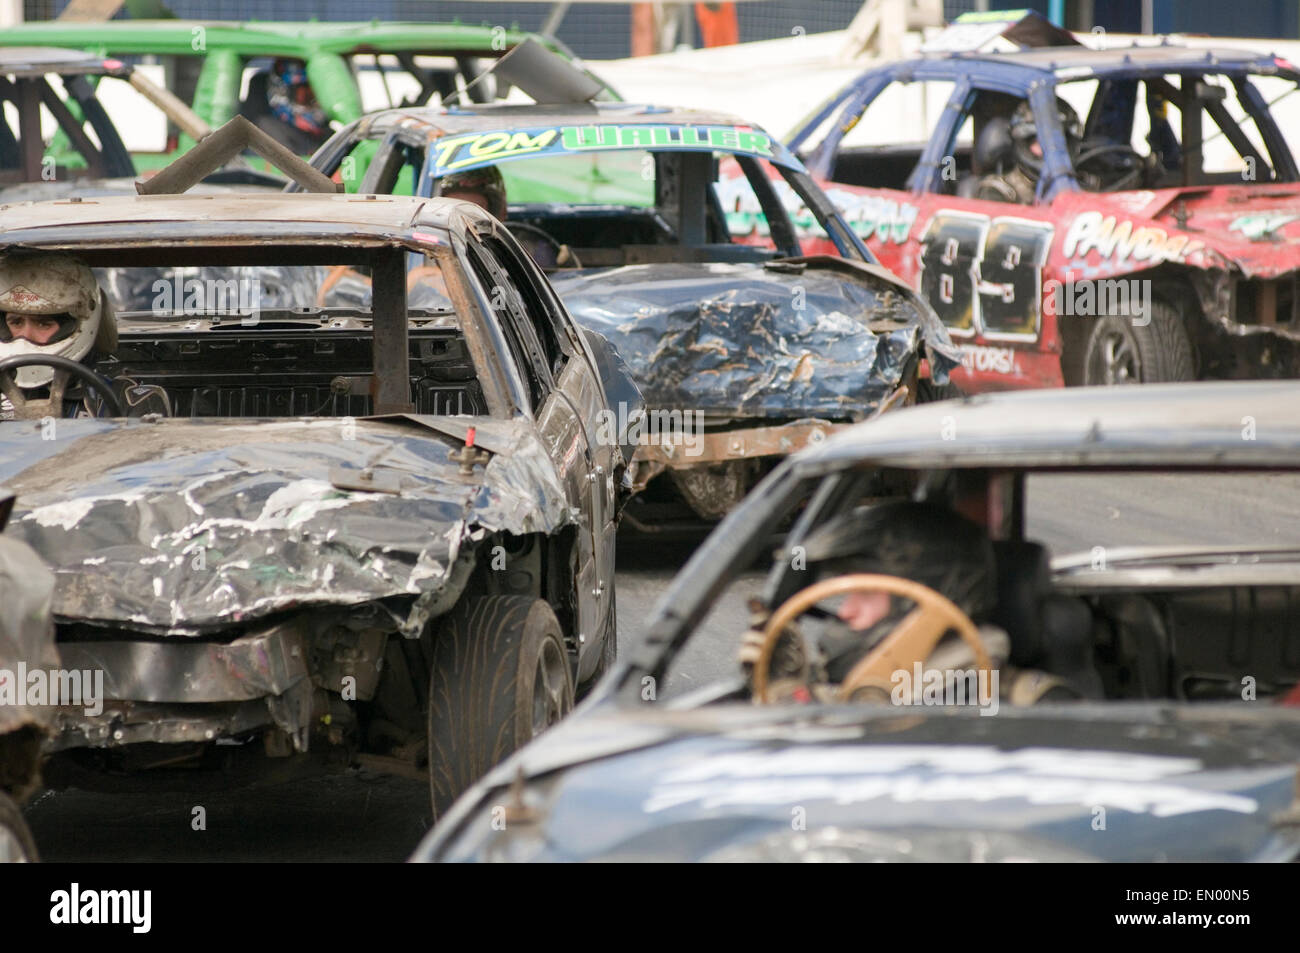 What is junk car racing?